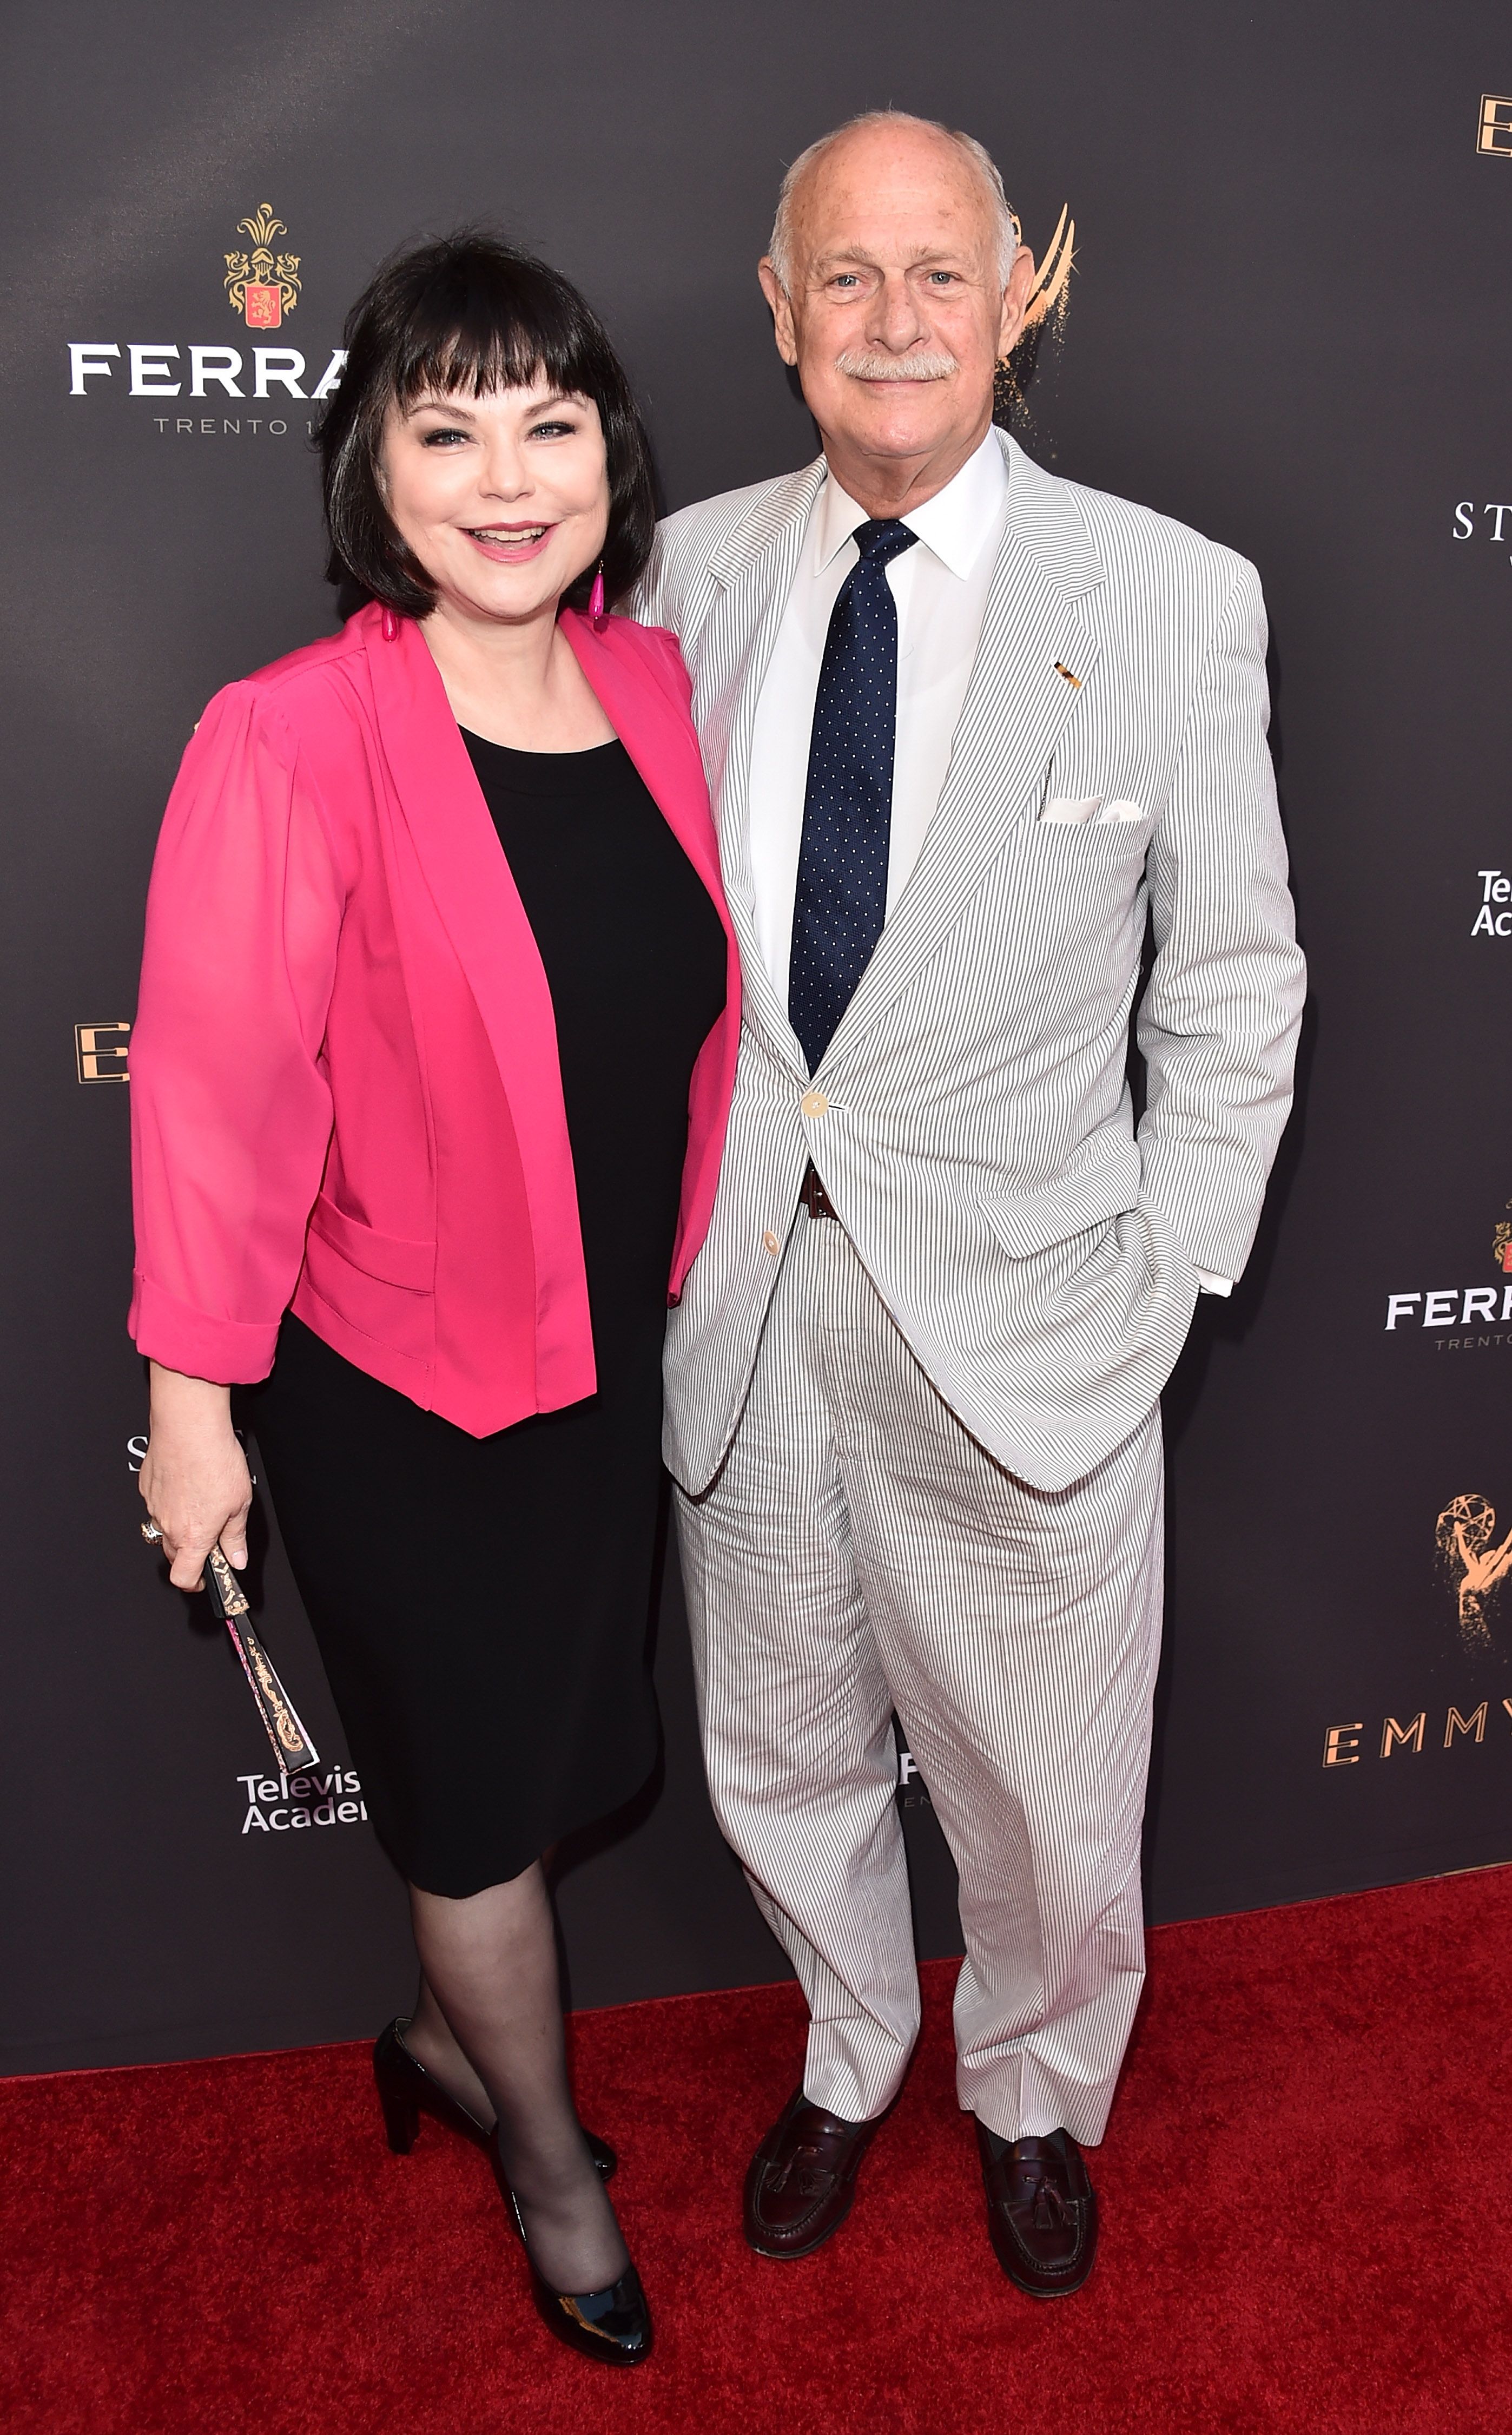 Delta Burke and Gerald McRaney during the Television Academy's Performers Peer Group Celebration at The Montage Beverly Hills on August 21, 2017 in Beverly Hills, California. | Source: Getty Images